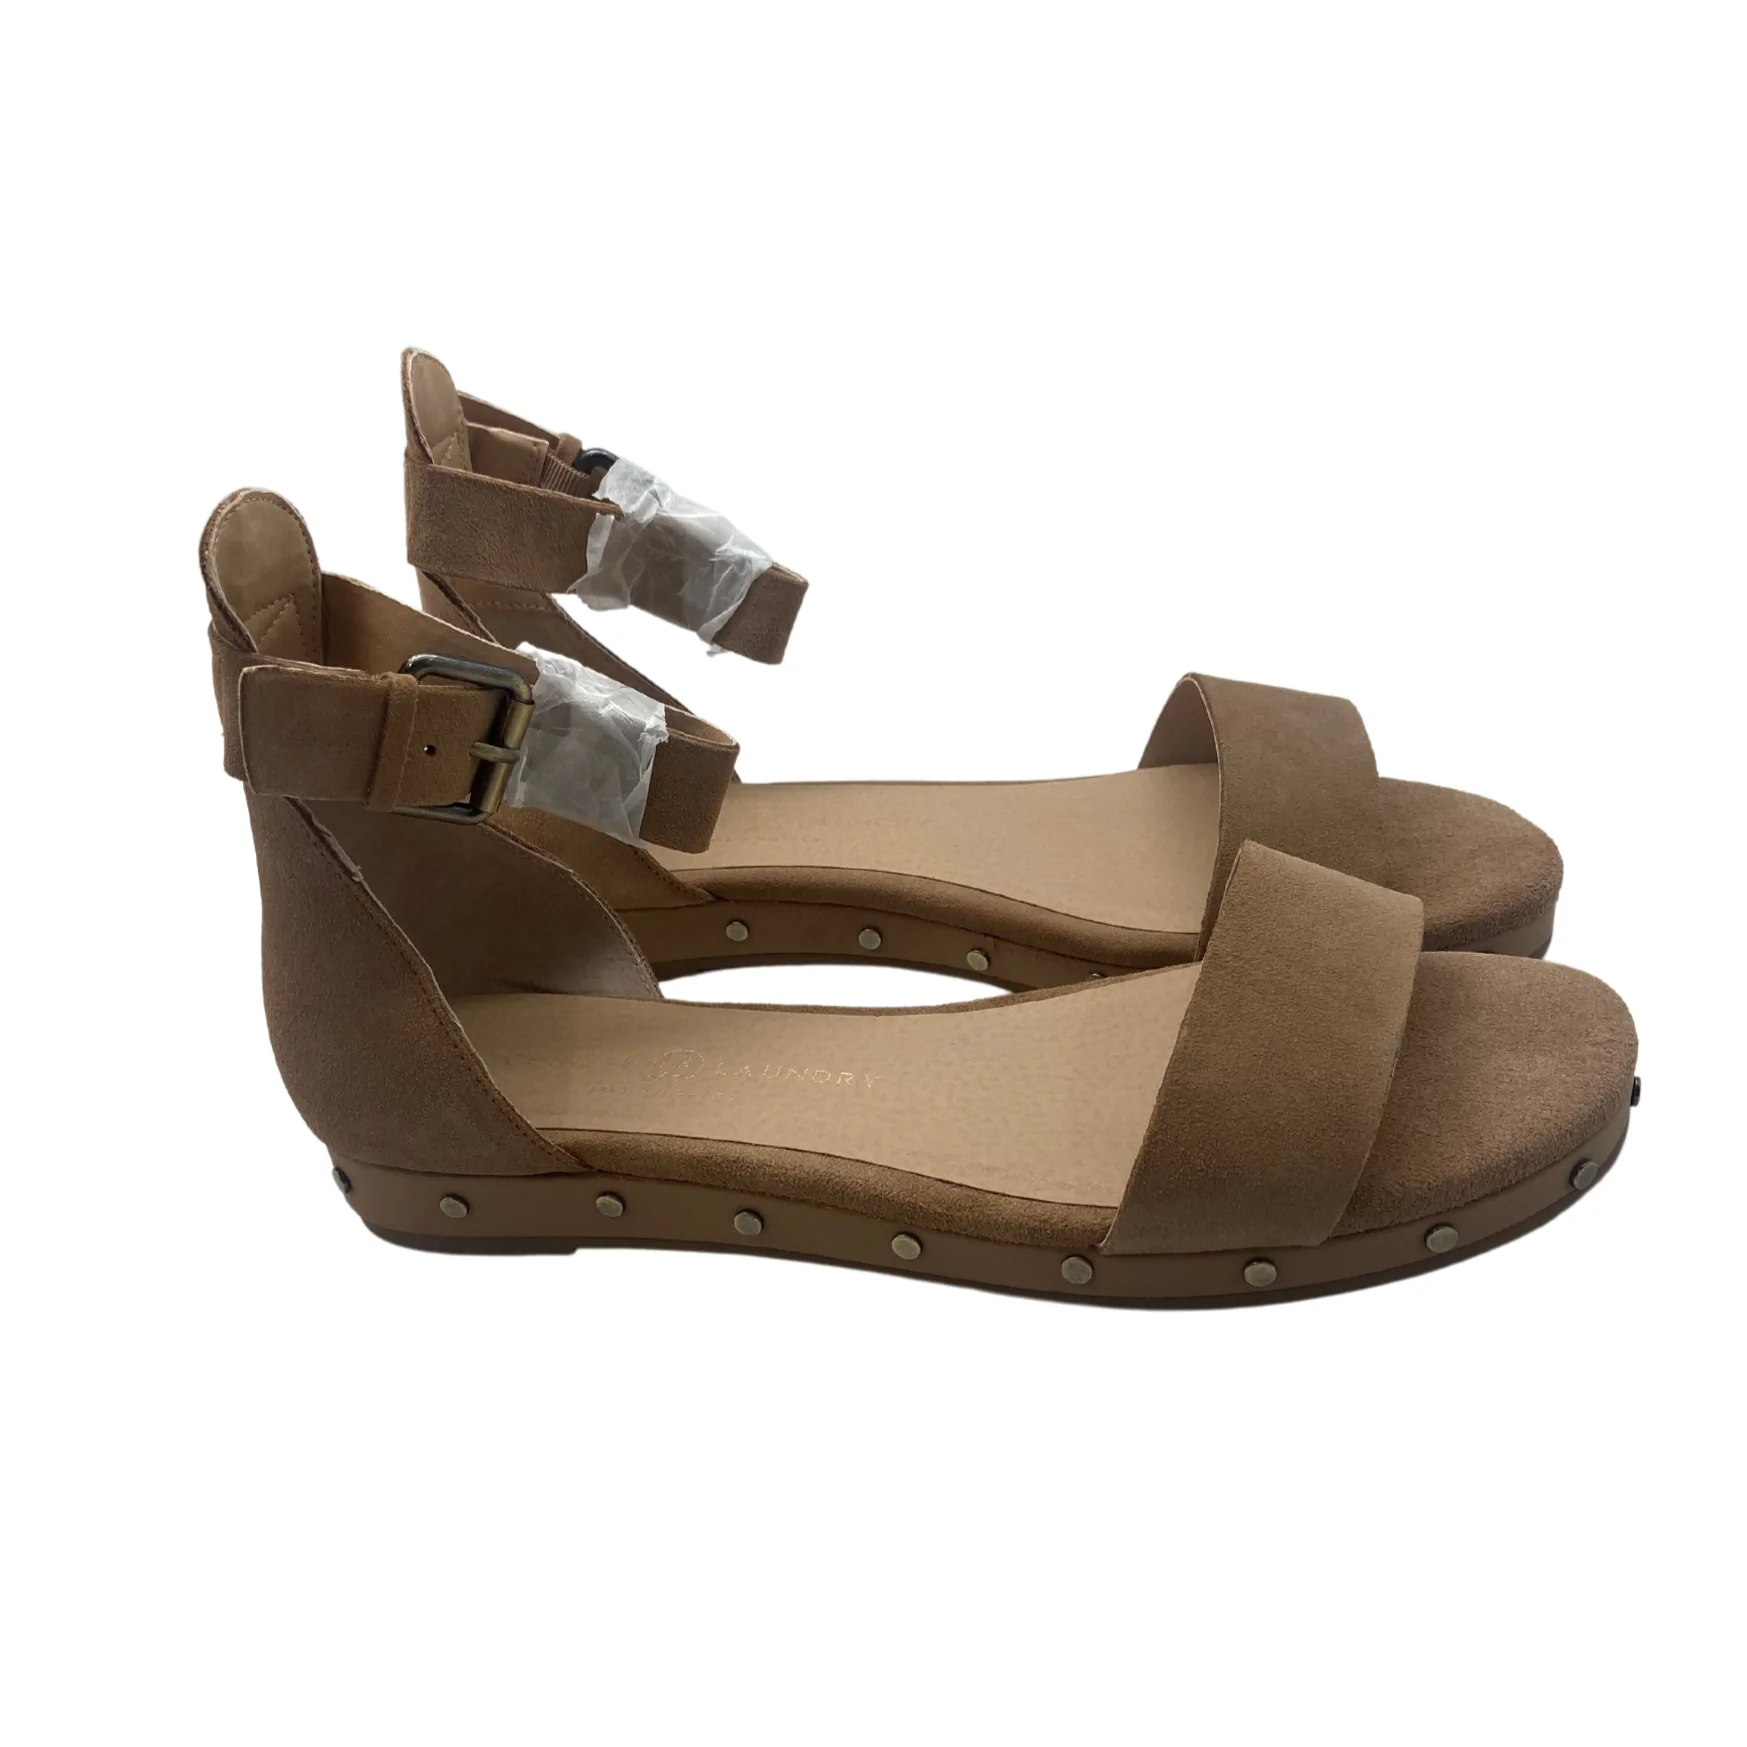 Chinese Laundry: Women's Sandals / Suede / Camel / Open Toe / Grady / Size 10